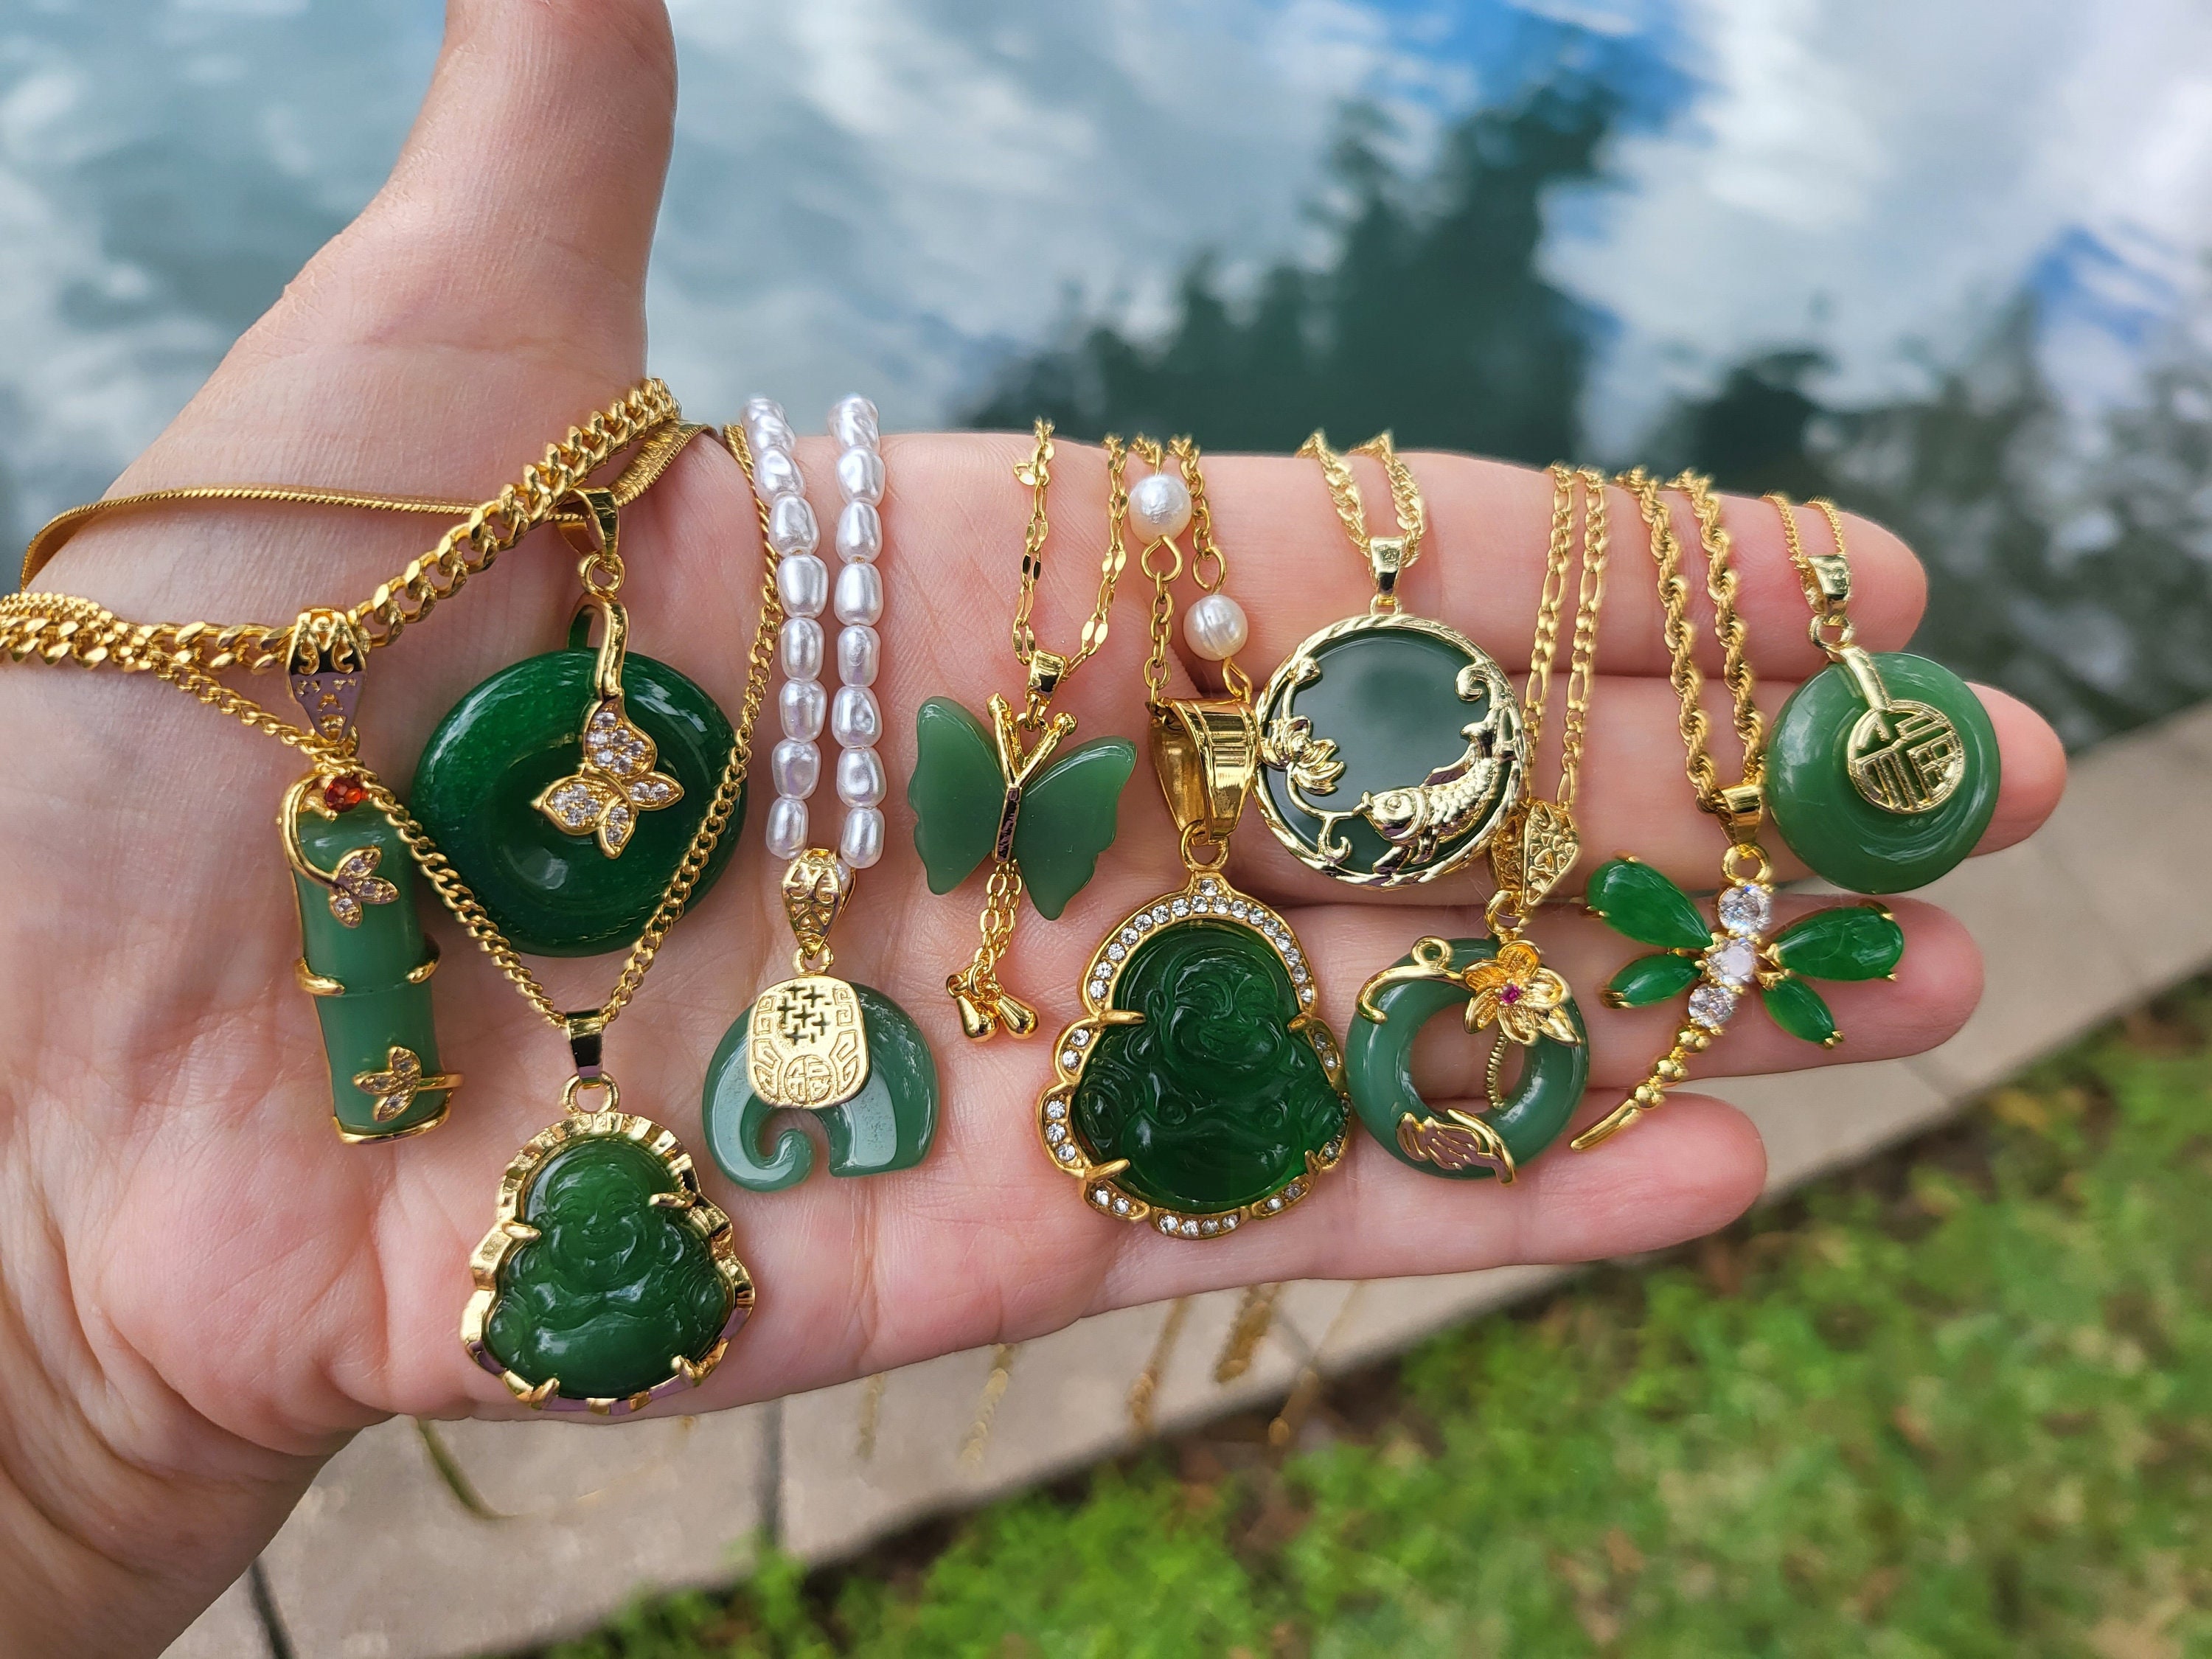 Genuine Green Jade Pendant Plated With 24k Gold Necklace 18 Inches Gold  Chain Premium Quality back in Stock With Limited Quantity - Etsy